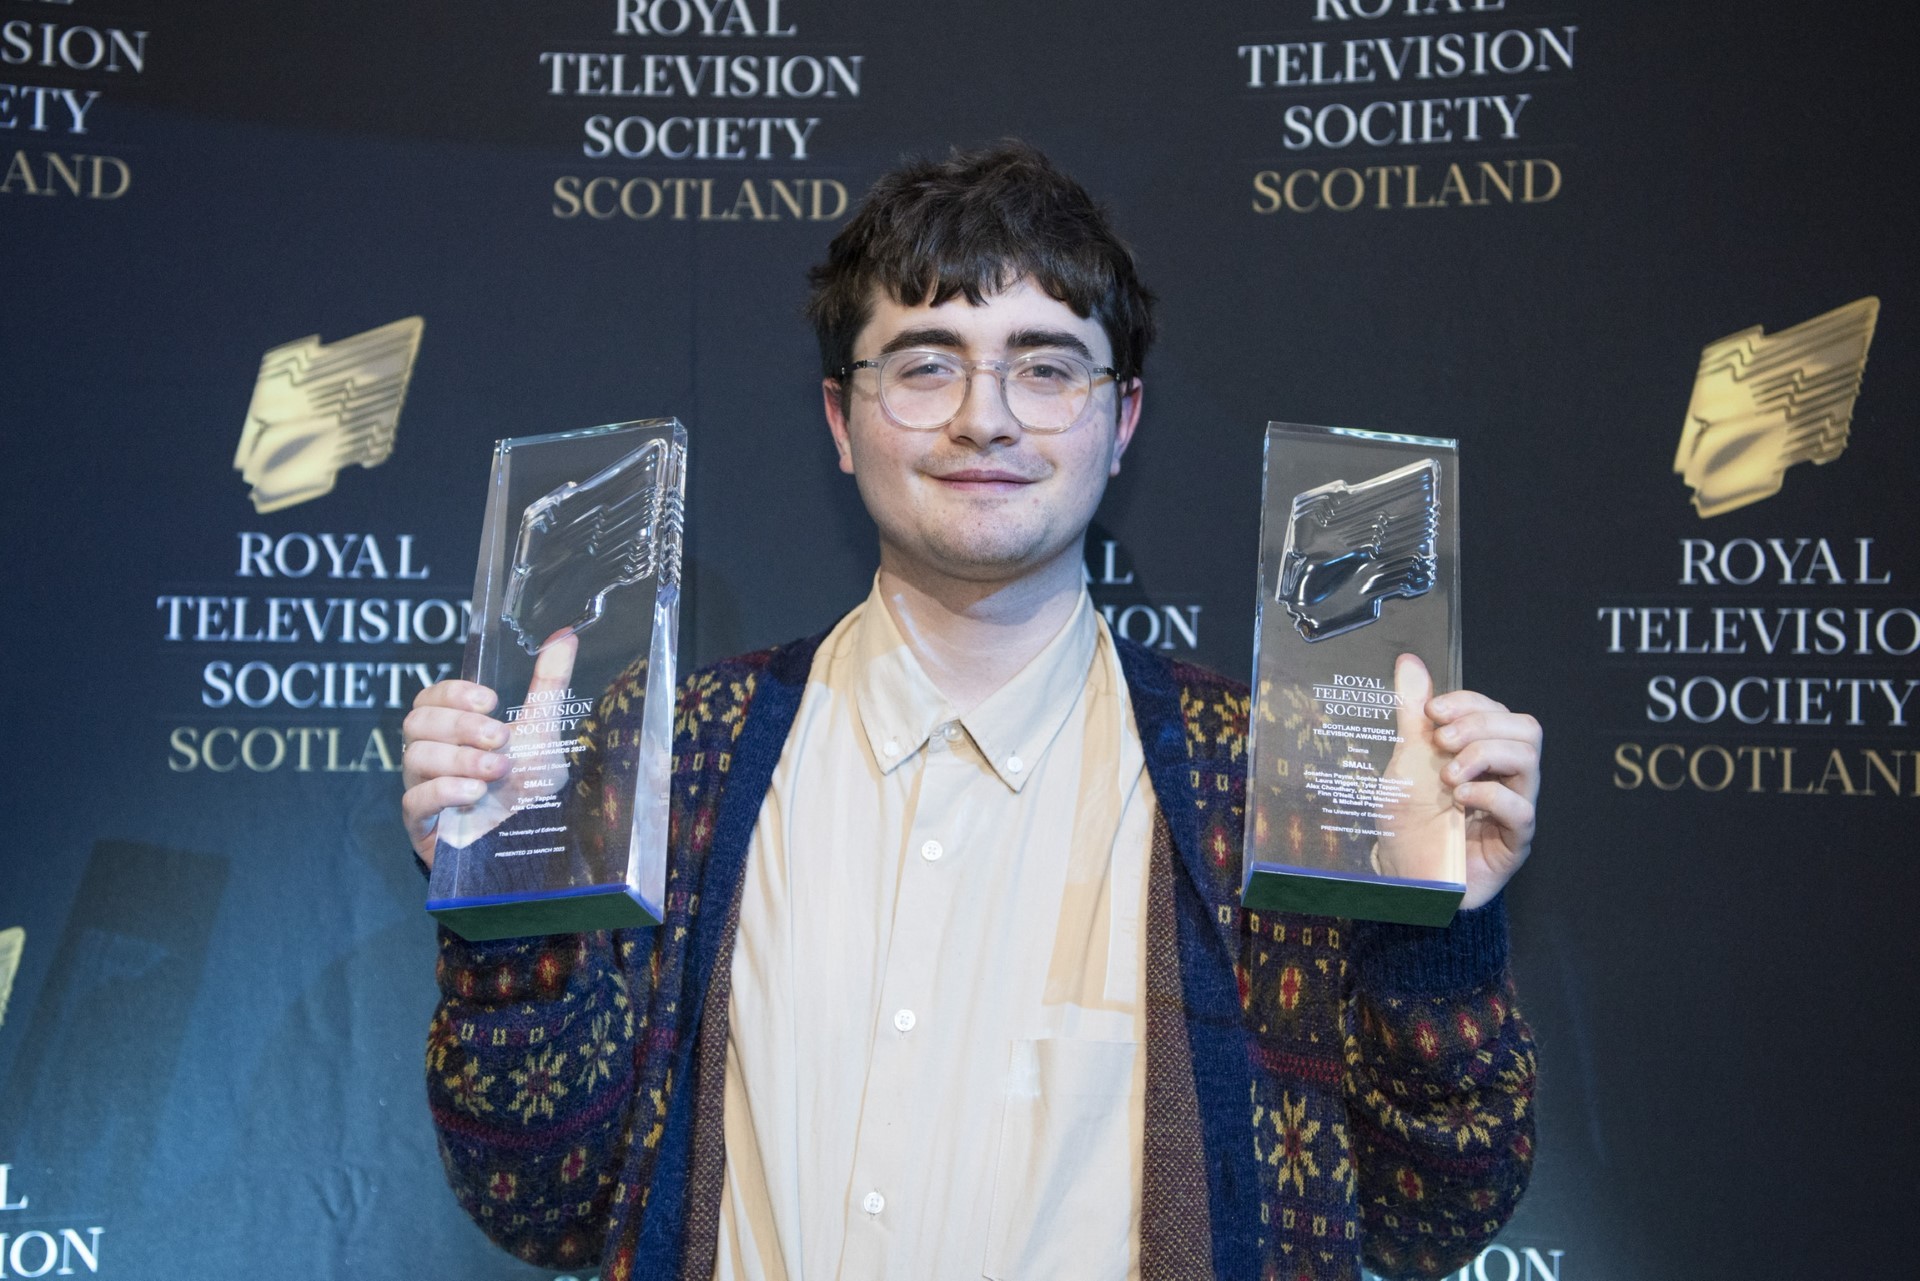 BEST STUDENT: Jonathan Paynes film Small won best drama, best student production and best sound at the RTS Awards. Pictures by Kirsty Anderson and Shonagh Kelly.